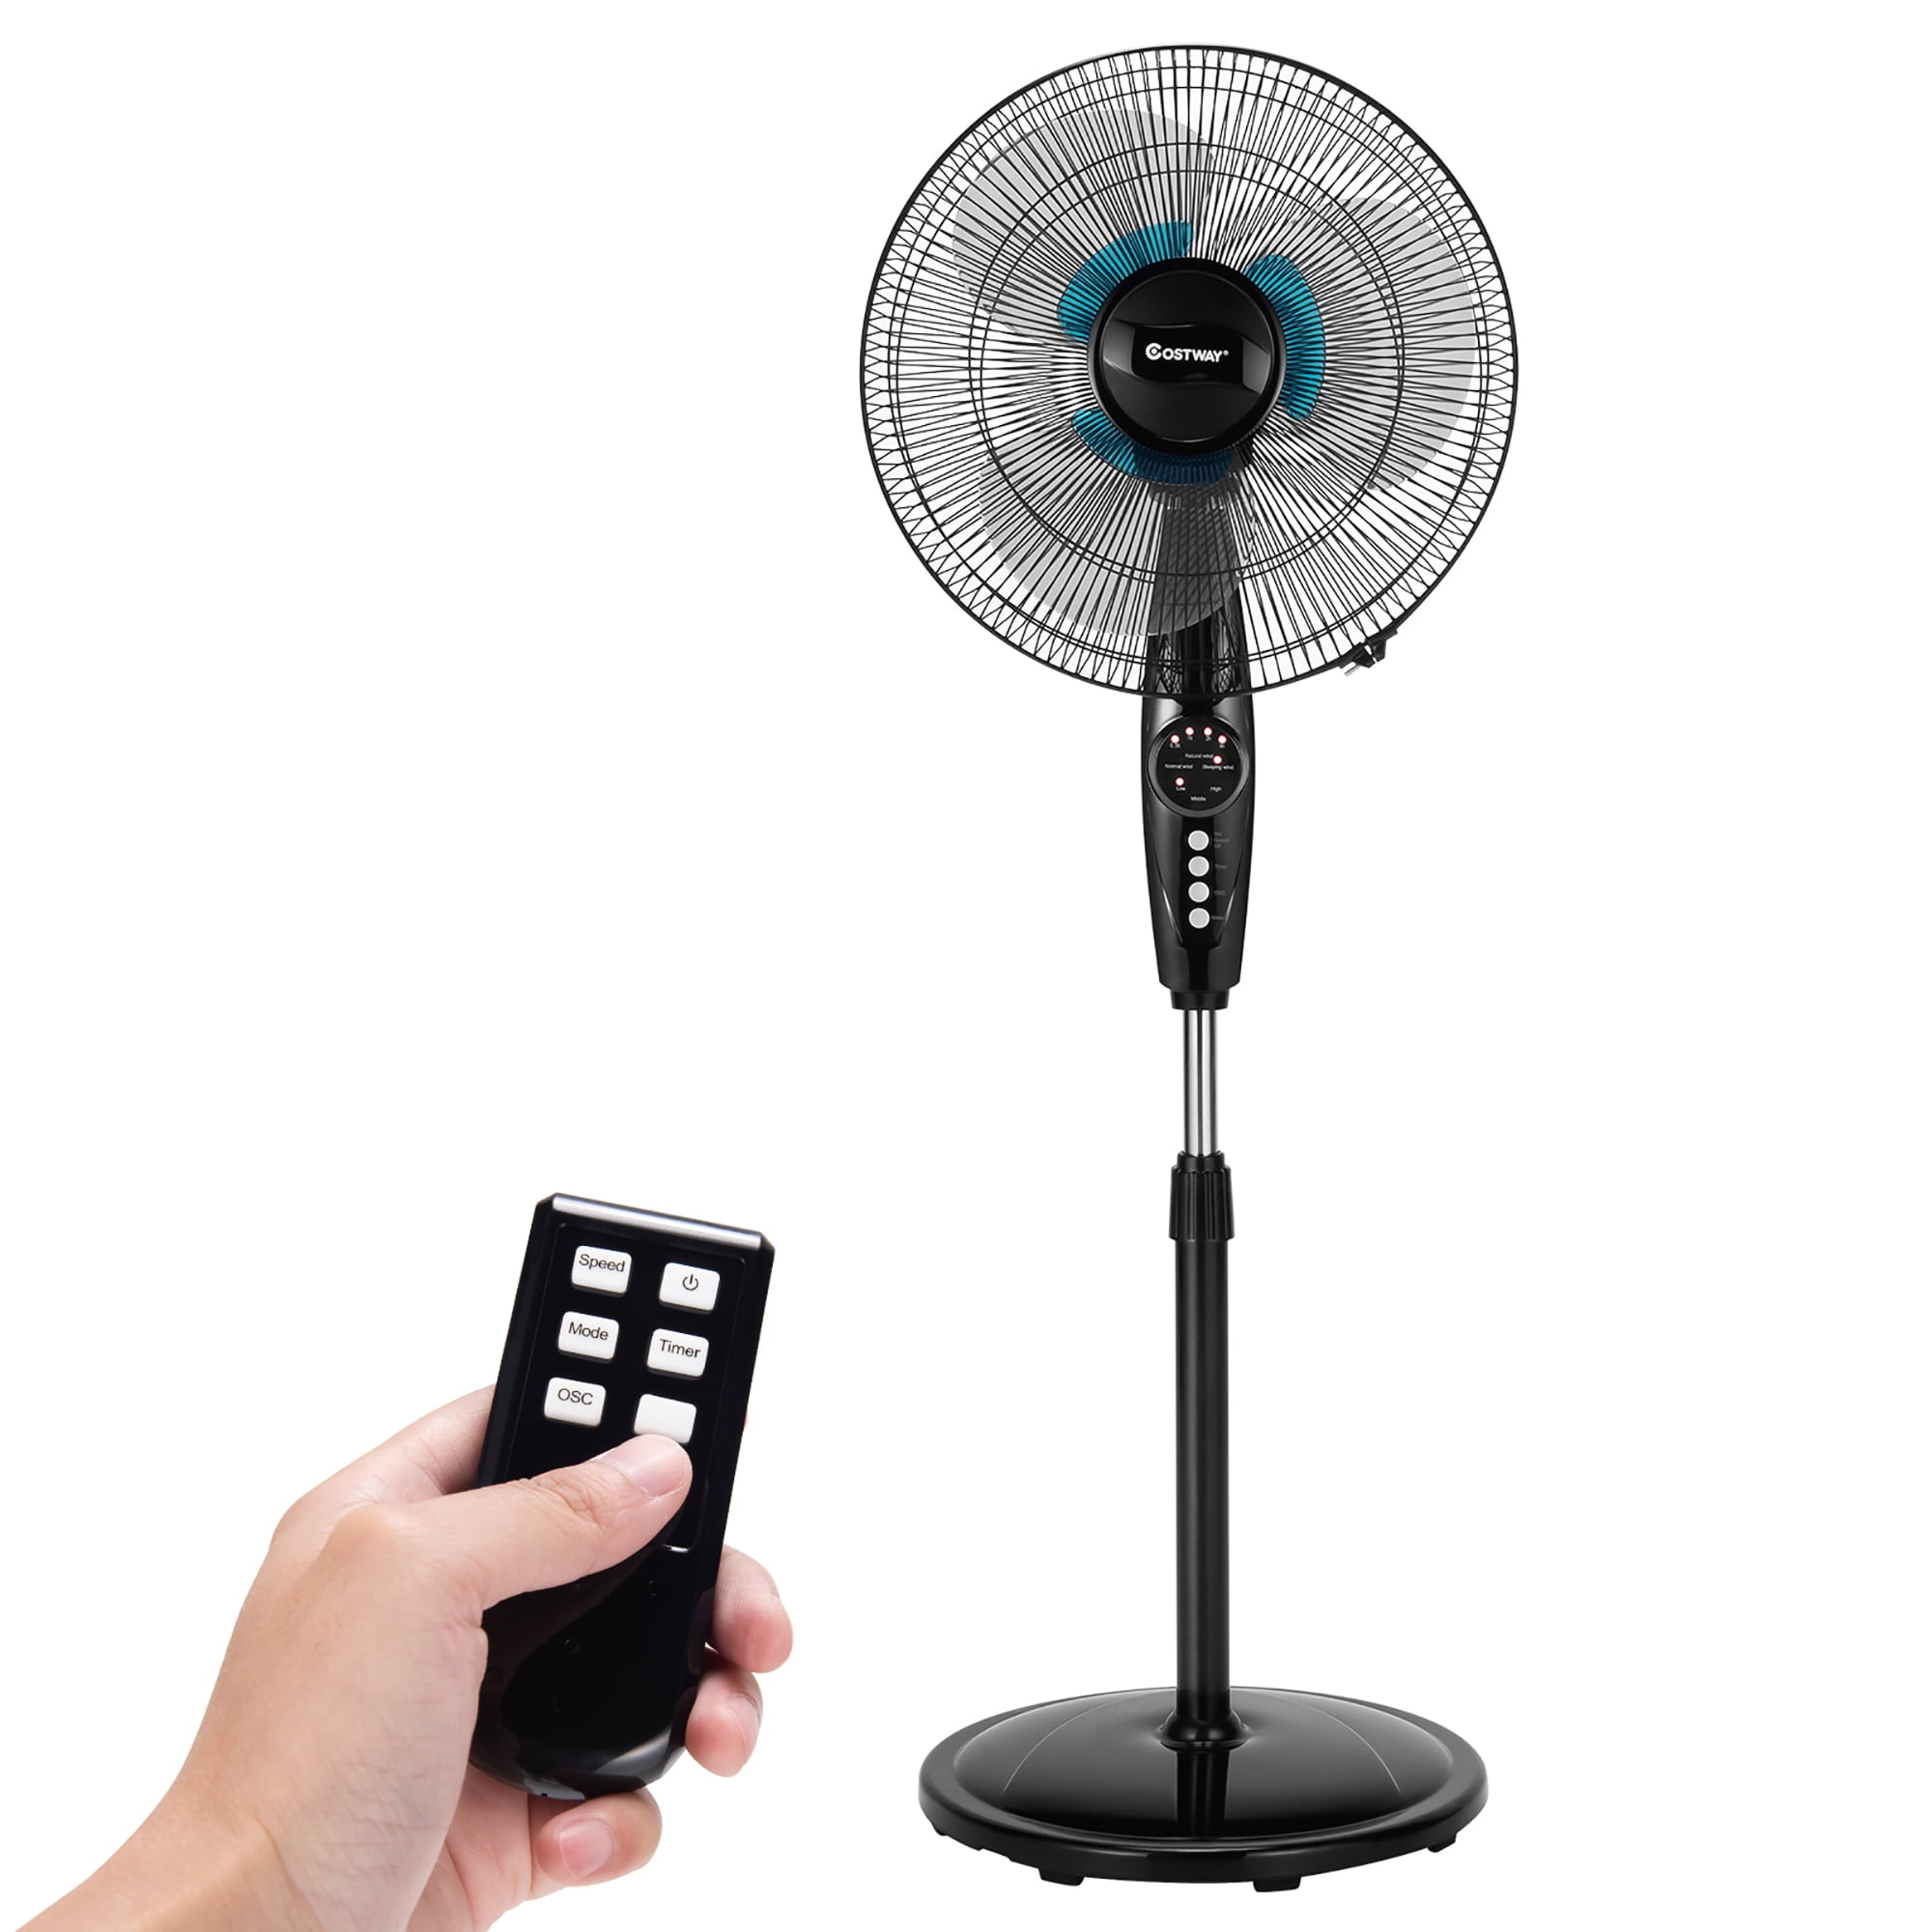 Lasko 36" 3-Speed Oscillating Tower Fan with Remote Control and Timer Model 251